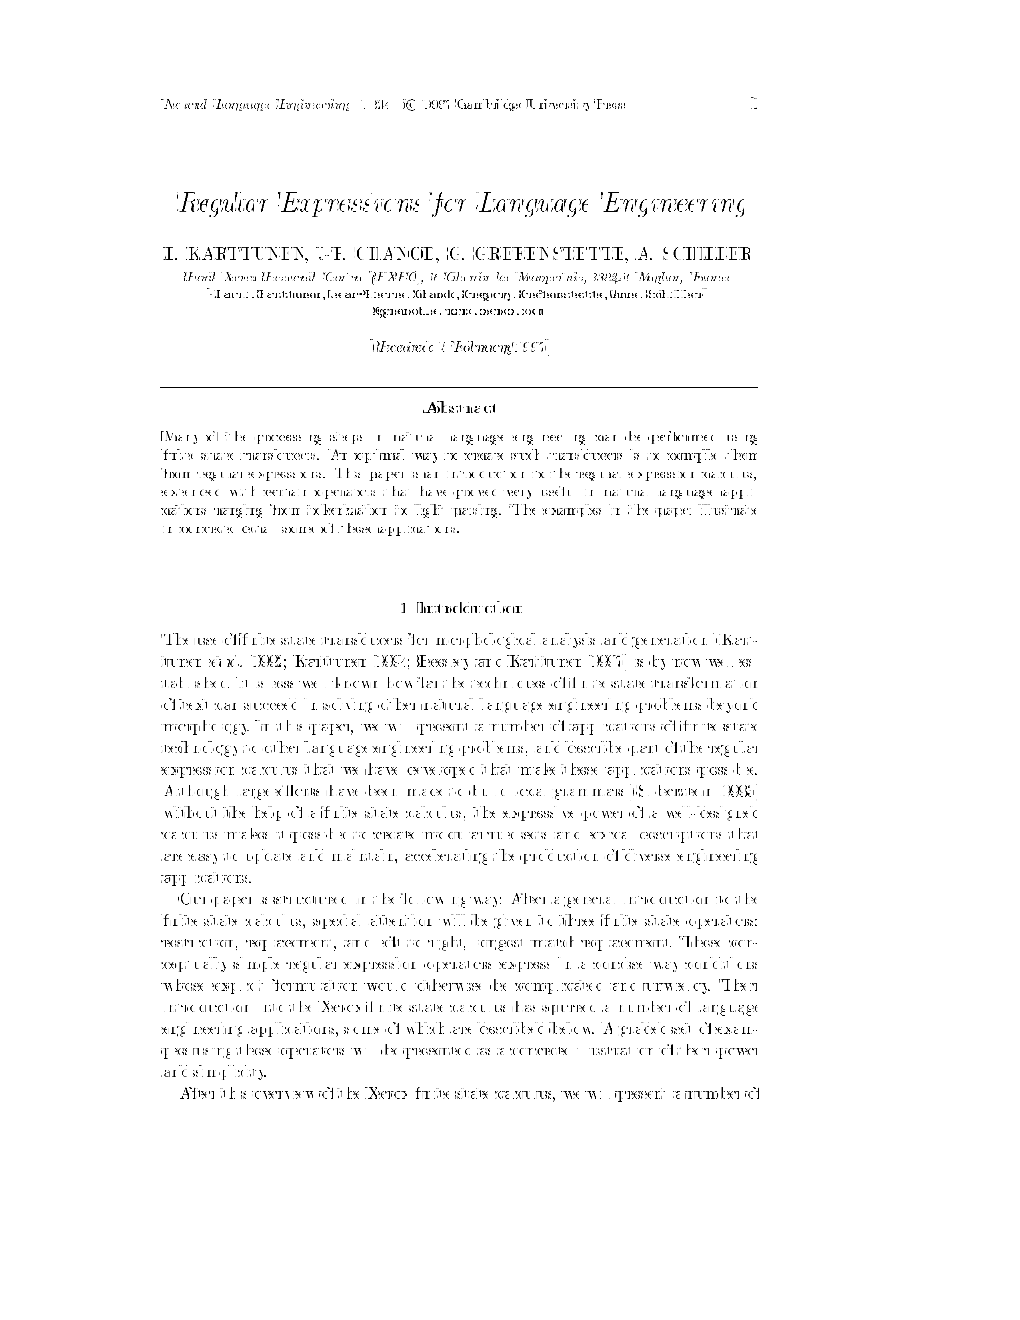 Regular Expressions for Language Engineering